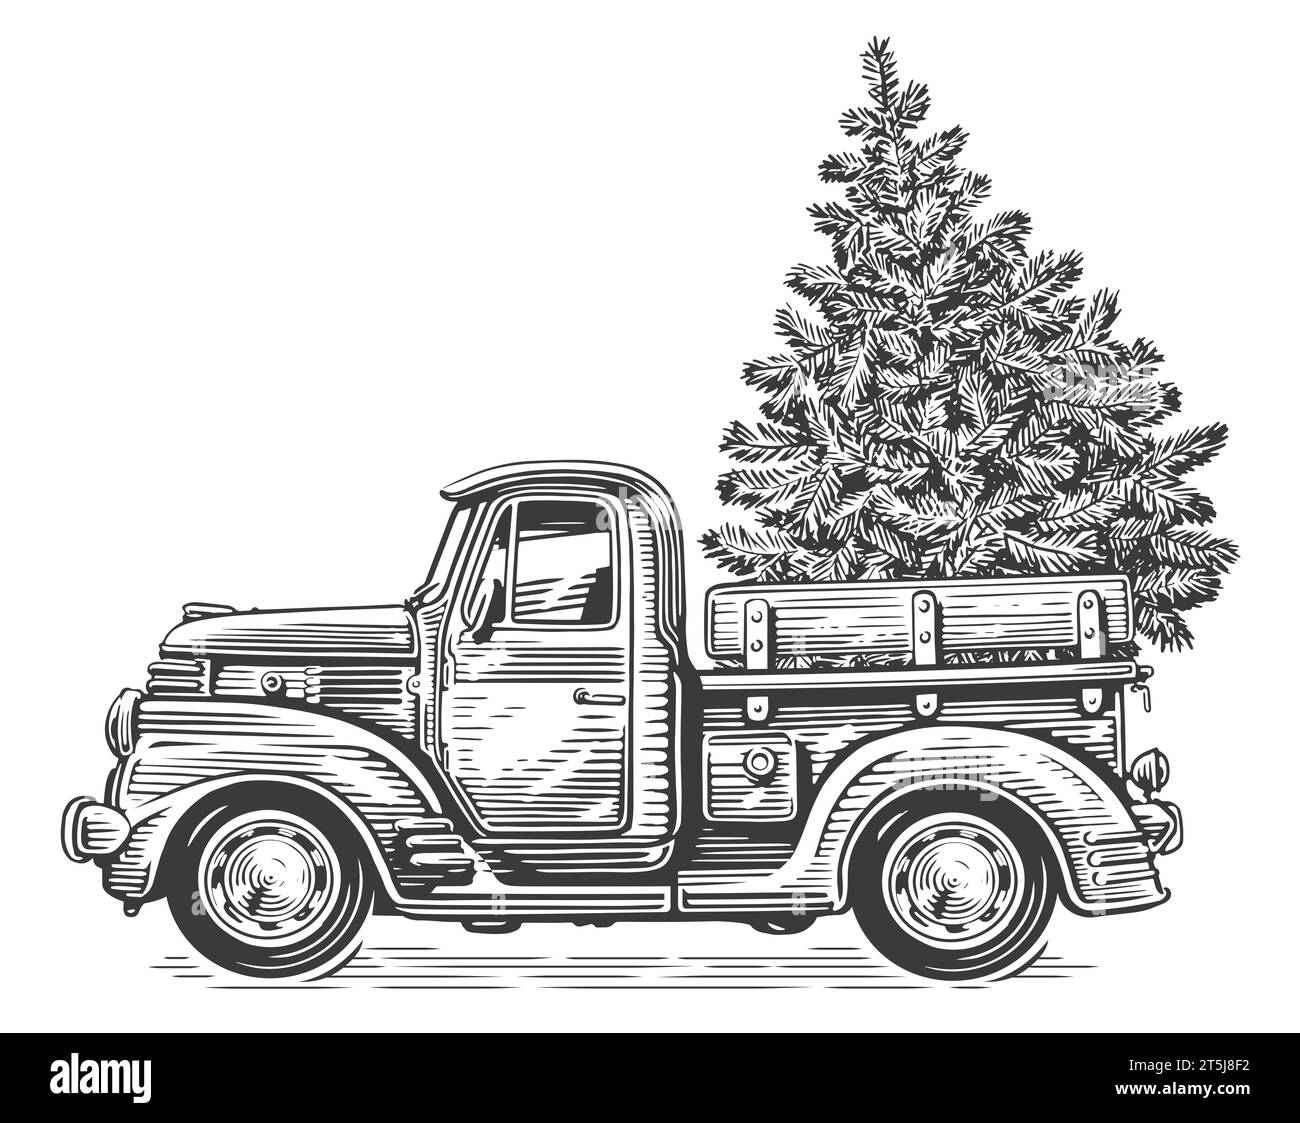 Christmas retro truck with pine tree. Hand drawn sketch vintage illustration engraving style Stock Photo